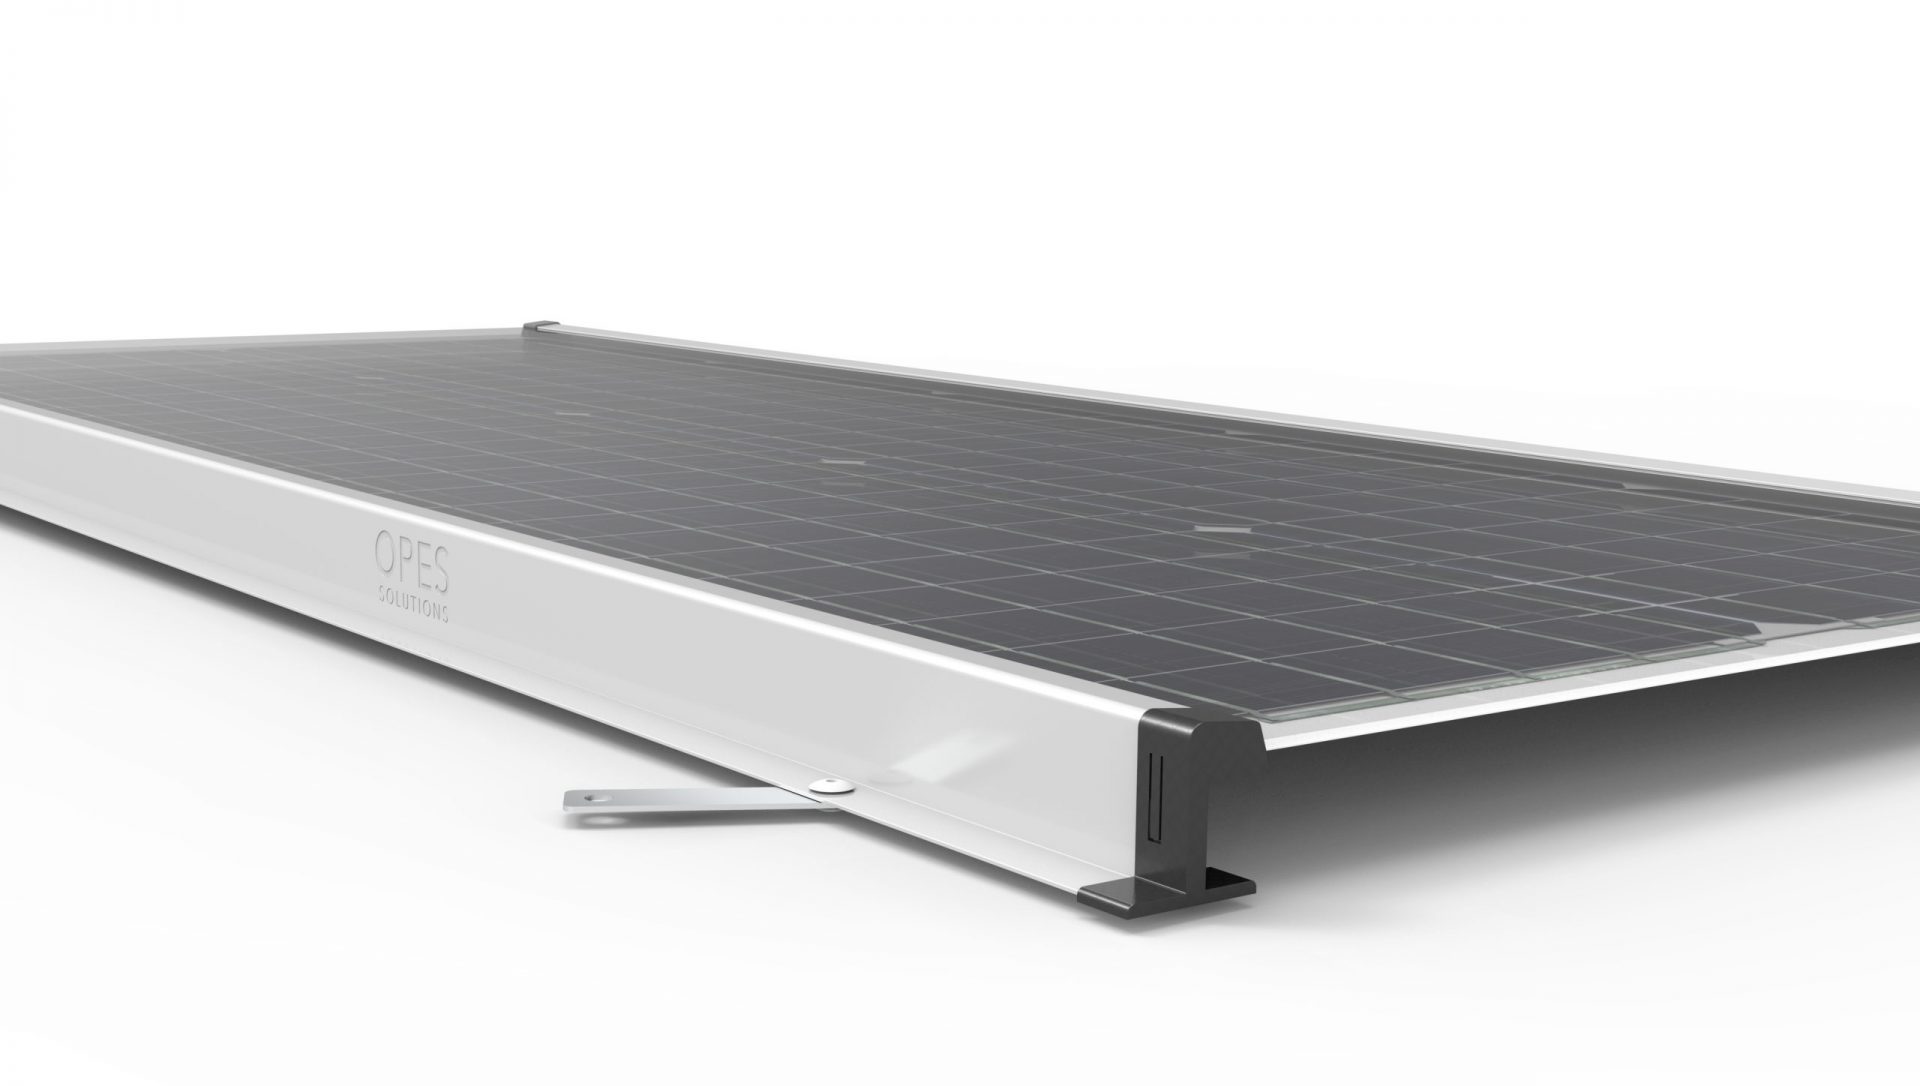 Higher Solar Home Systems efficiency thanks to PV Modules with an innovative frame design